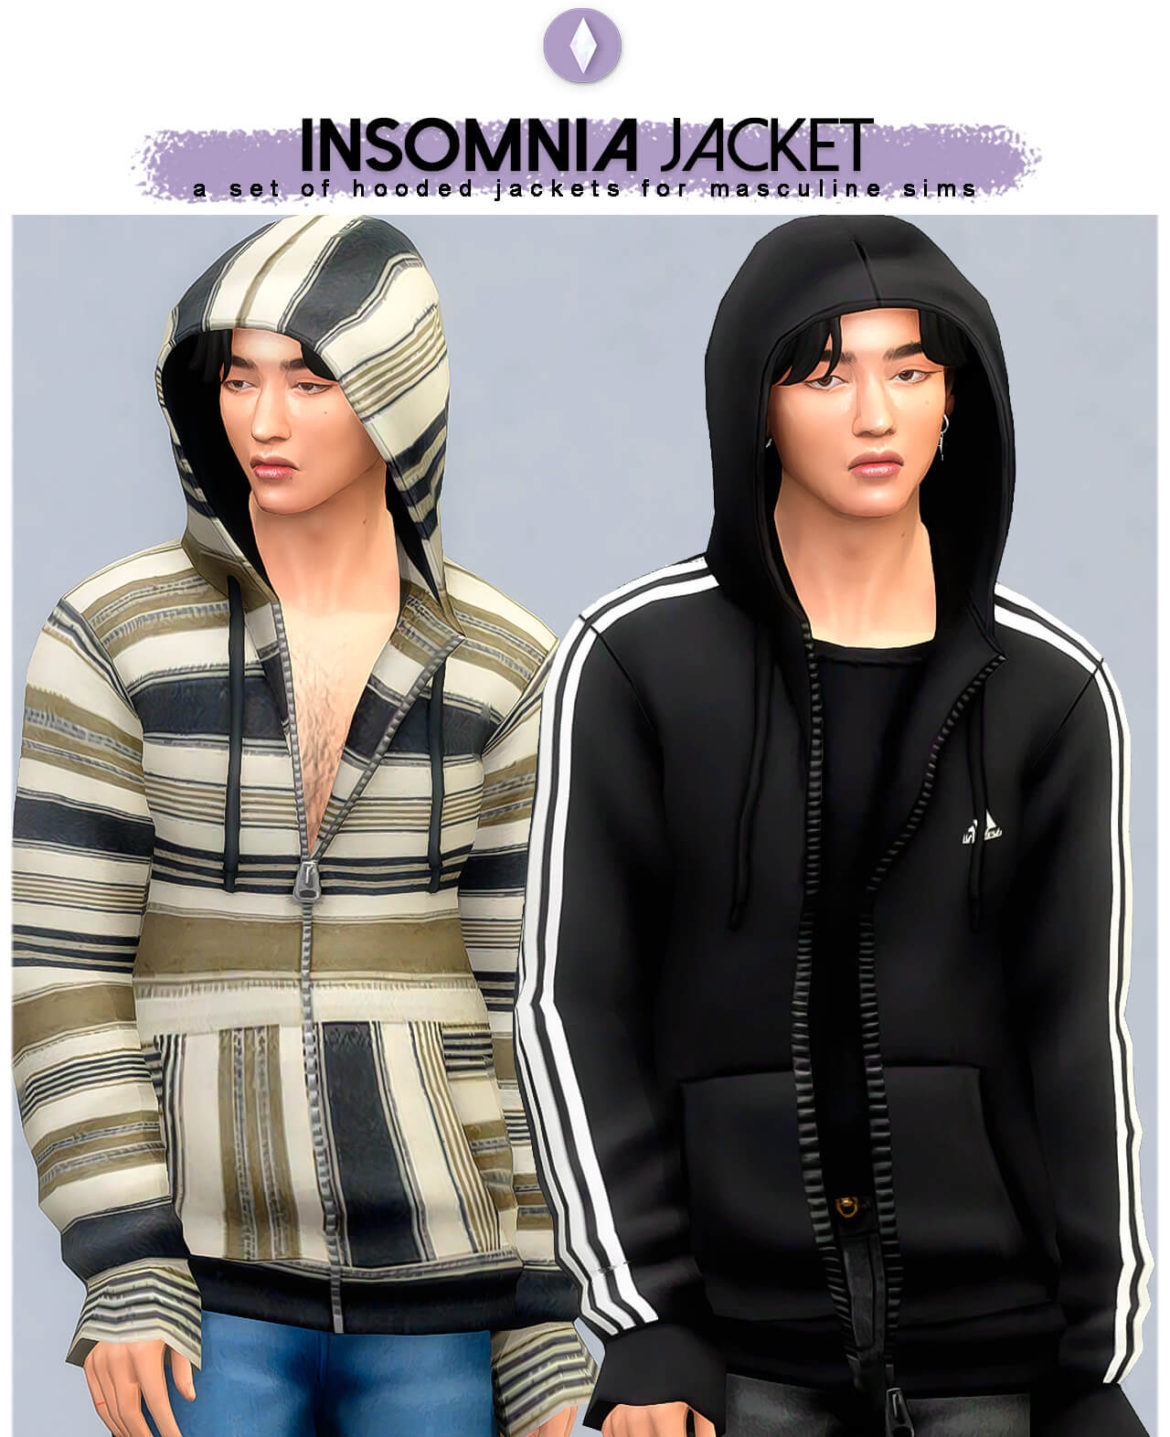 The Sims 4 insomnia jacket - Best Sims Mods